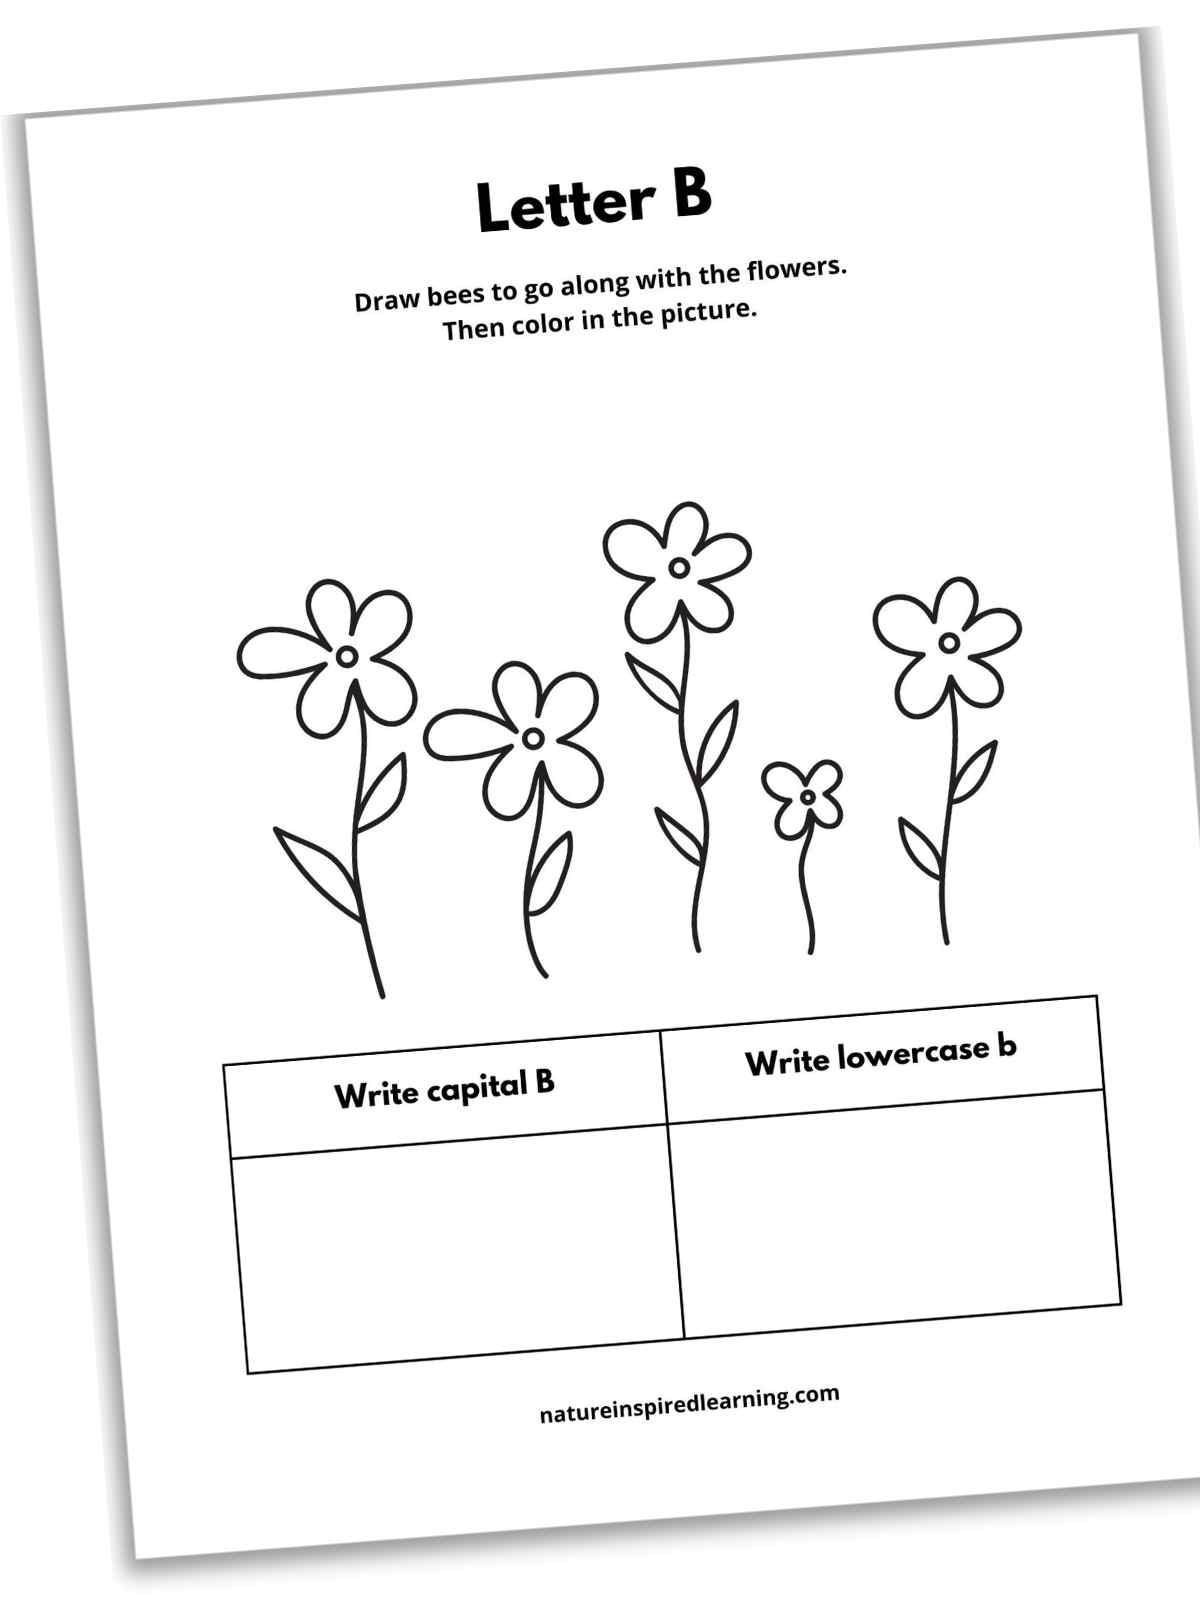 black and white letter b worksheet slanted with a writing prompt, flowers, and a grid